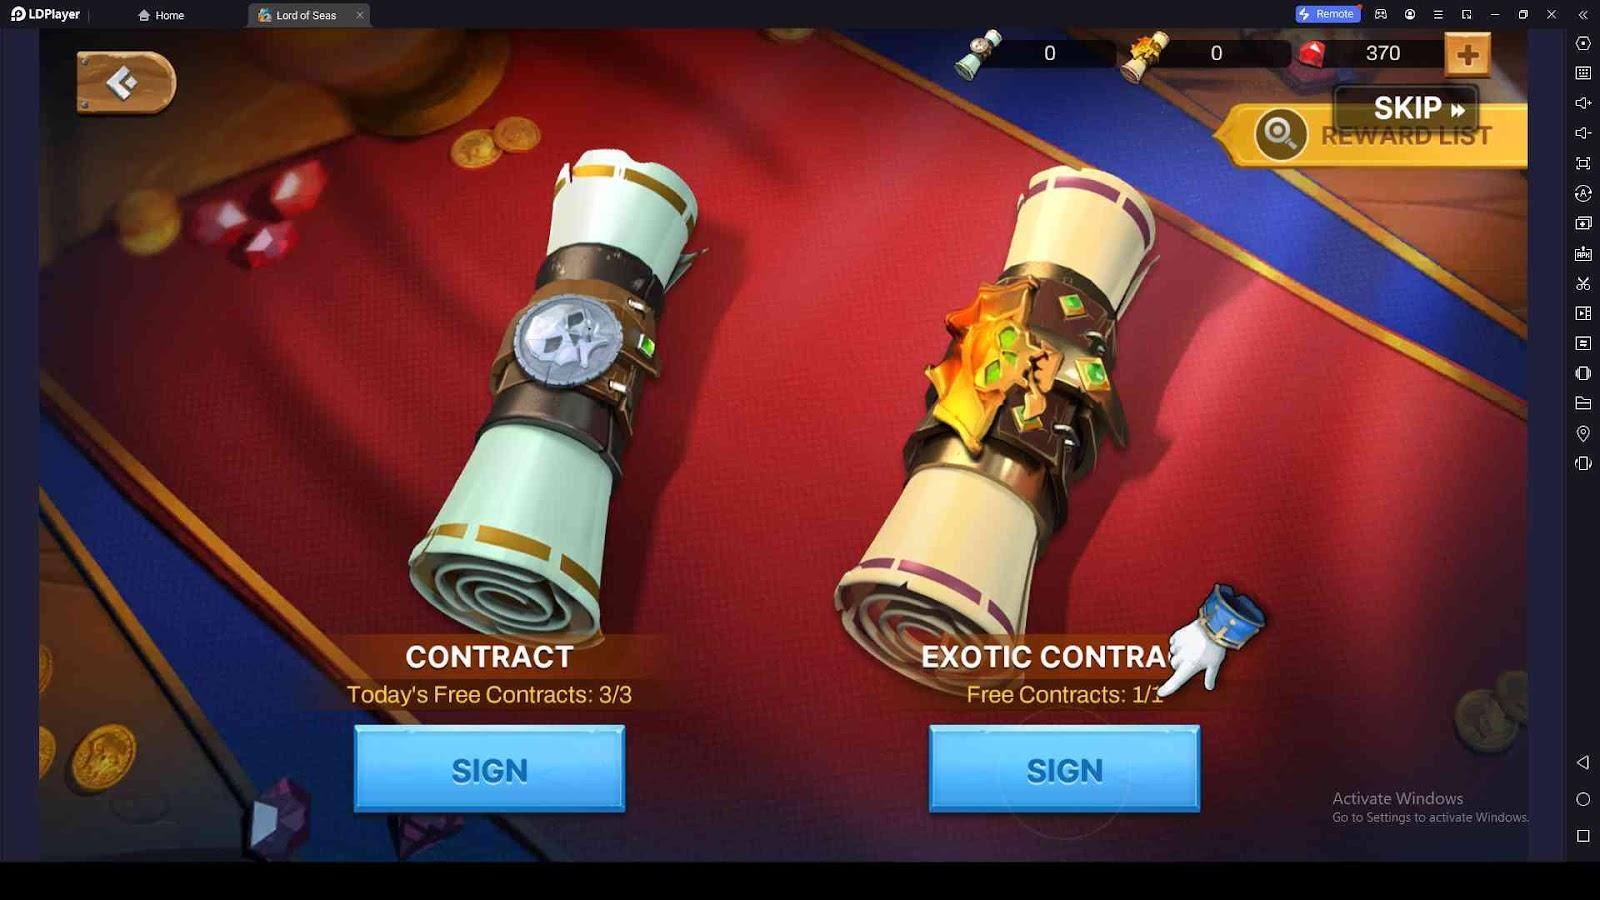 Basic and Exotic Contracts